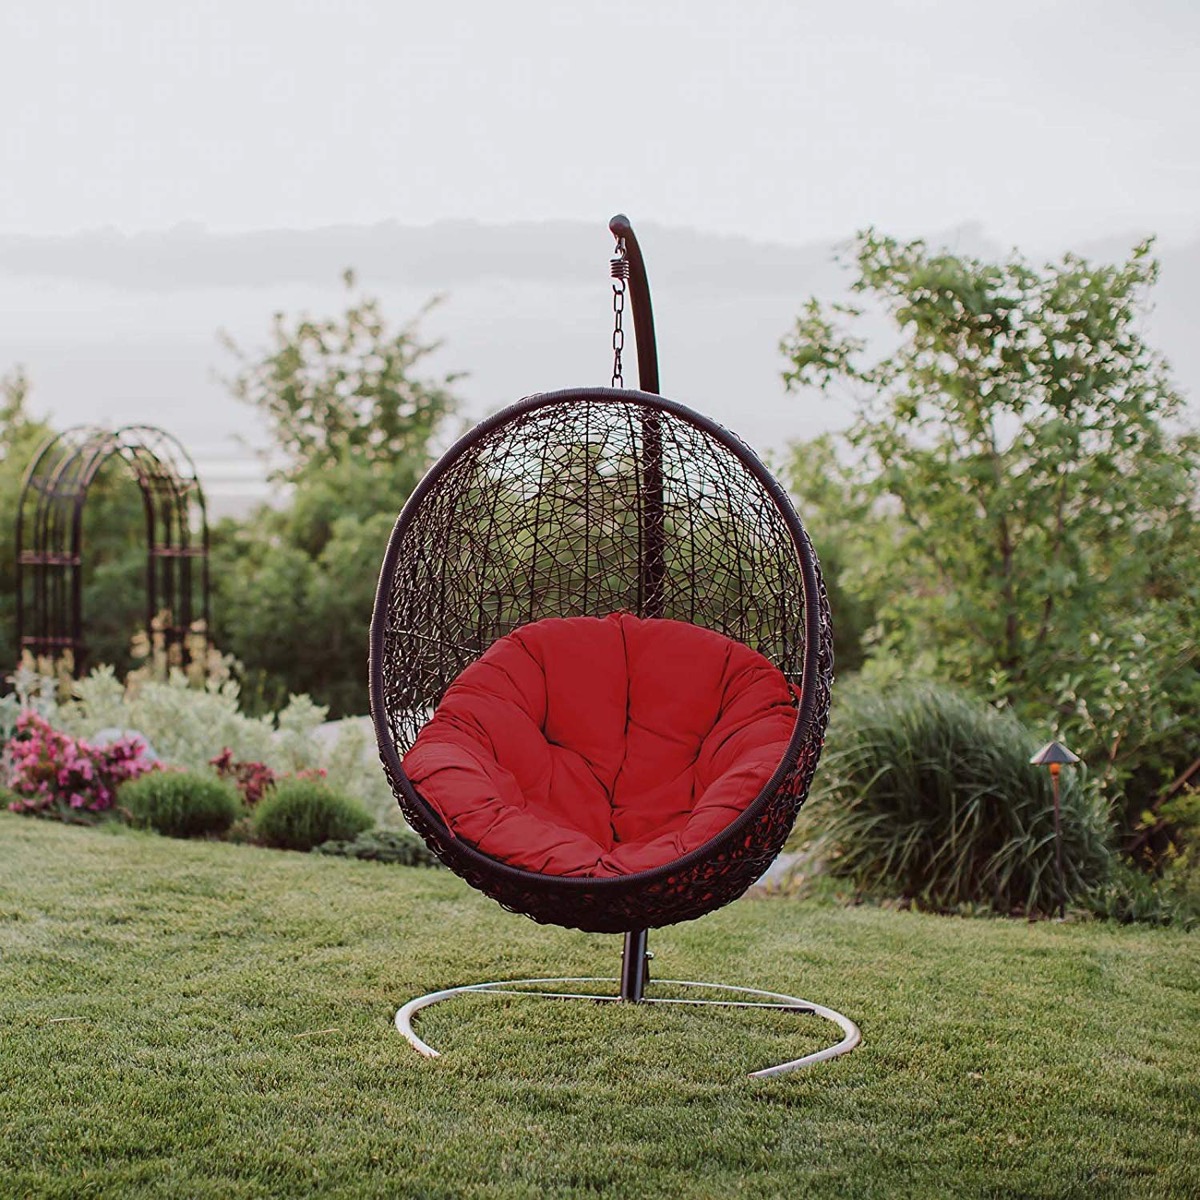 43 Hanging Chairs And Seats To Get You, Free Standing Hanging Garden Chair